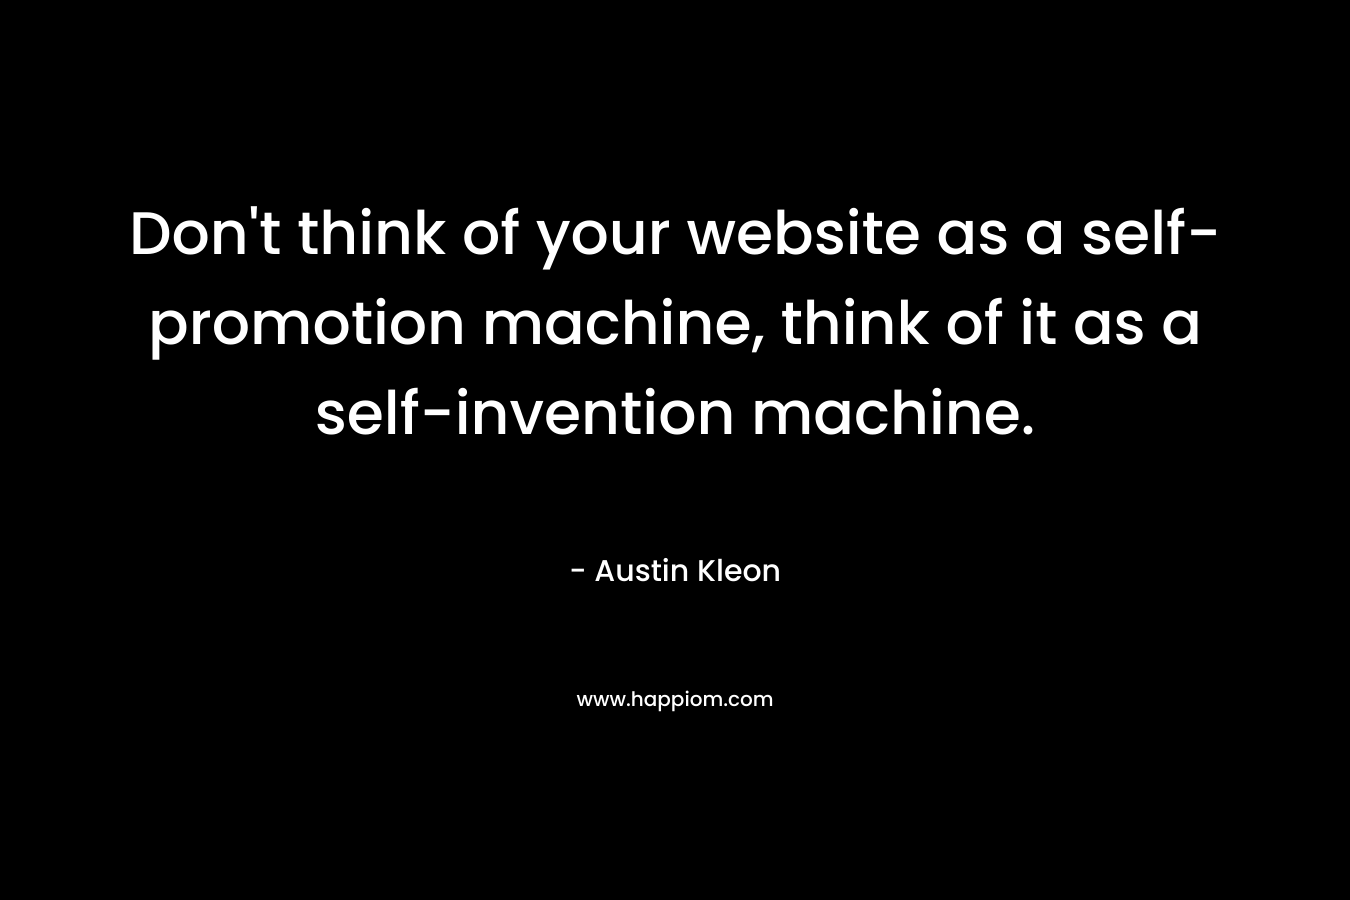 Don't think of your website as a self-promotion machine, think of it as a self-invention machine.